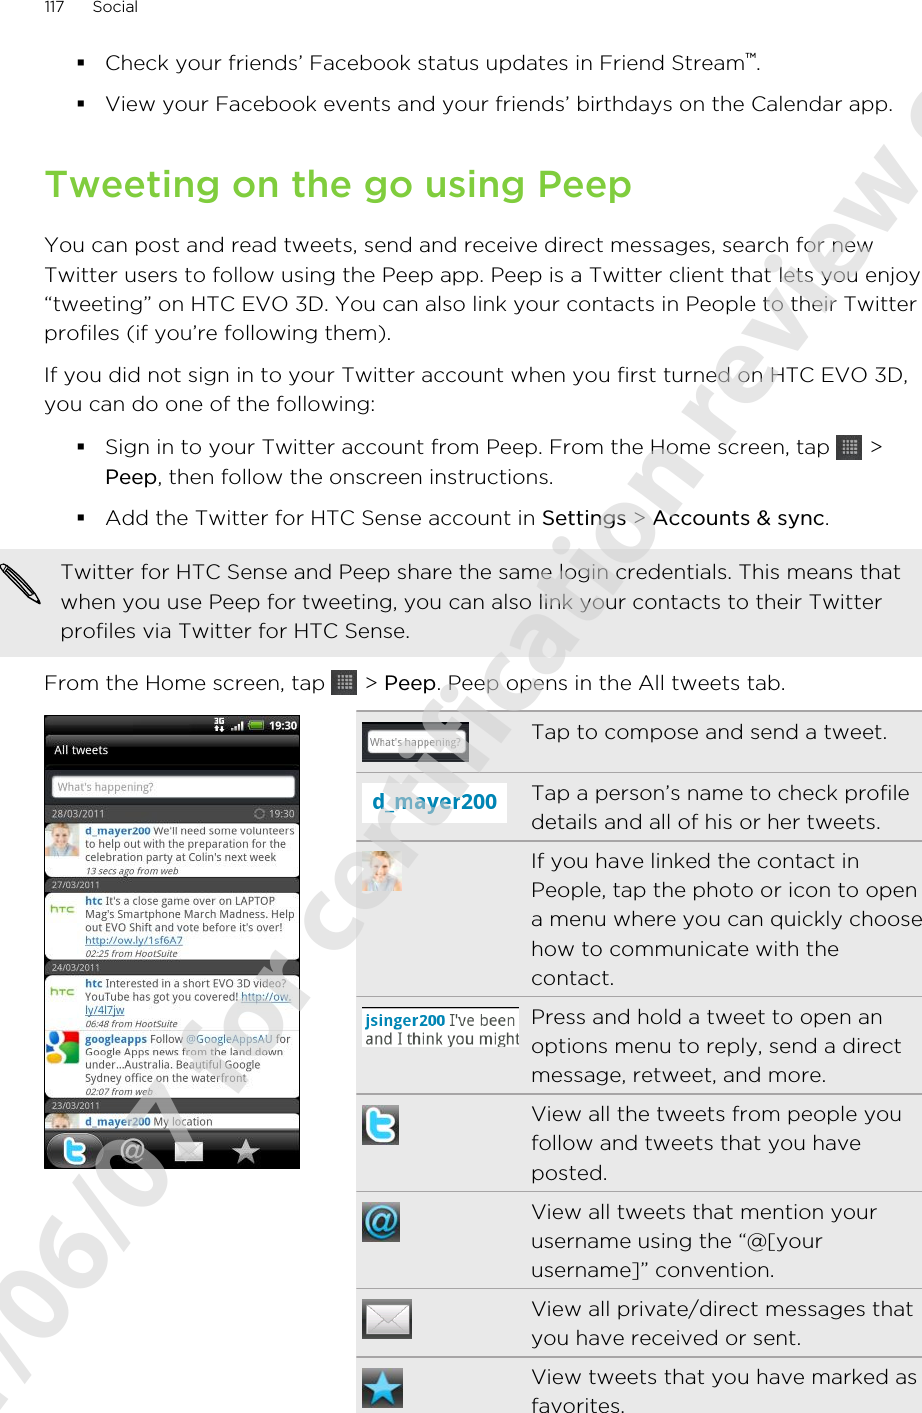 §Check your friends’ Facebook status updates in Friend Stream™.§View your Facebook events and your friends’ birthdays on the Calendar app.Tweeting on the go using PeepYou can post and read tweets, send and receive direct messages, search for newTwitter users to follow using the Peep app. Peep is a Twitter client that lets you enjoy“tweeting” on HTC EVO 3D. You can also link your contacts in People to their Twitterprofiles (if you’re following them).If you did not sign in to your Twitter account when you first turned on HTC EVO 3D,you can do one of the following:§Sign in to your Twitter account from Peep. From the Home screen, tap   &gt;Peep, then follow the onscreen instructions.§Add the Twitter for HTC Sense account in Settings &gt; Accounts &amp; sync.Twitter for HTC Sense and Peep share the same login credentials. This means thatwhen you use Peep for tweeting, you can also link your contacts to their Twitterprofiles via Twitter for HTC Sense.From the Home screen, tap   &gt; Peep. Peep opens in the All tweets tab.Tap to compose and send a tweet.Tap a person’s name to check profiledetails and all of his or her tweets.If you have linked the contact inPeople, tap the photo or icon to opena menu where you can quickly choosehow to communicate with thecontact.Press and hold a tweet to open anoptions menu to reply, send a directmessage, retweet, and more.View all the tweets from people youfollow and tweets that you haveposted.View all tweets that mention yourusername using the “@[yourusername]” convention.View all private/direct messages thatyou have received or sent.View tweets that you have marked asfavorites.117 Social2011/06/07 for certification review only